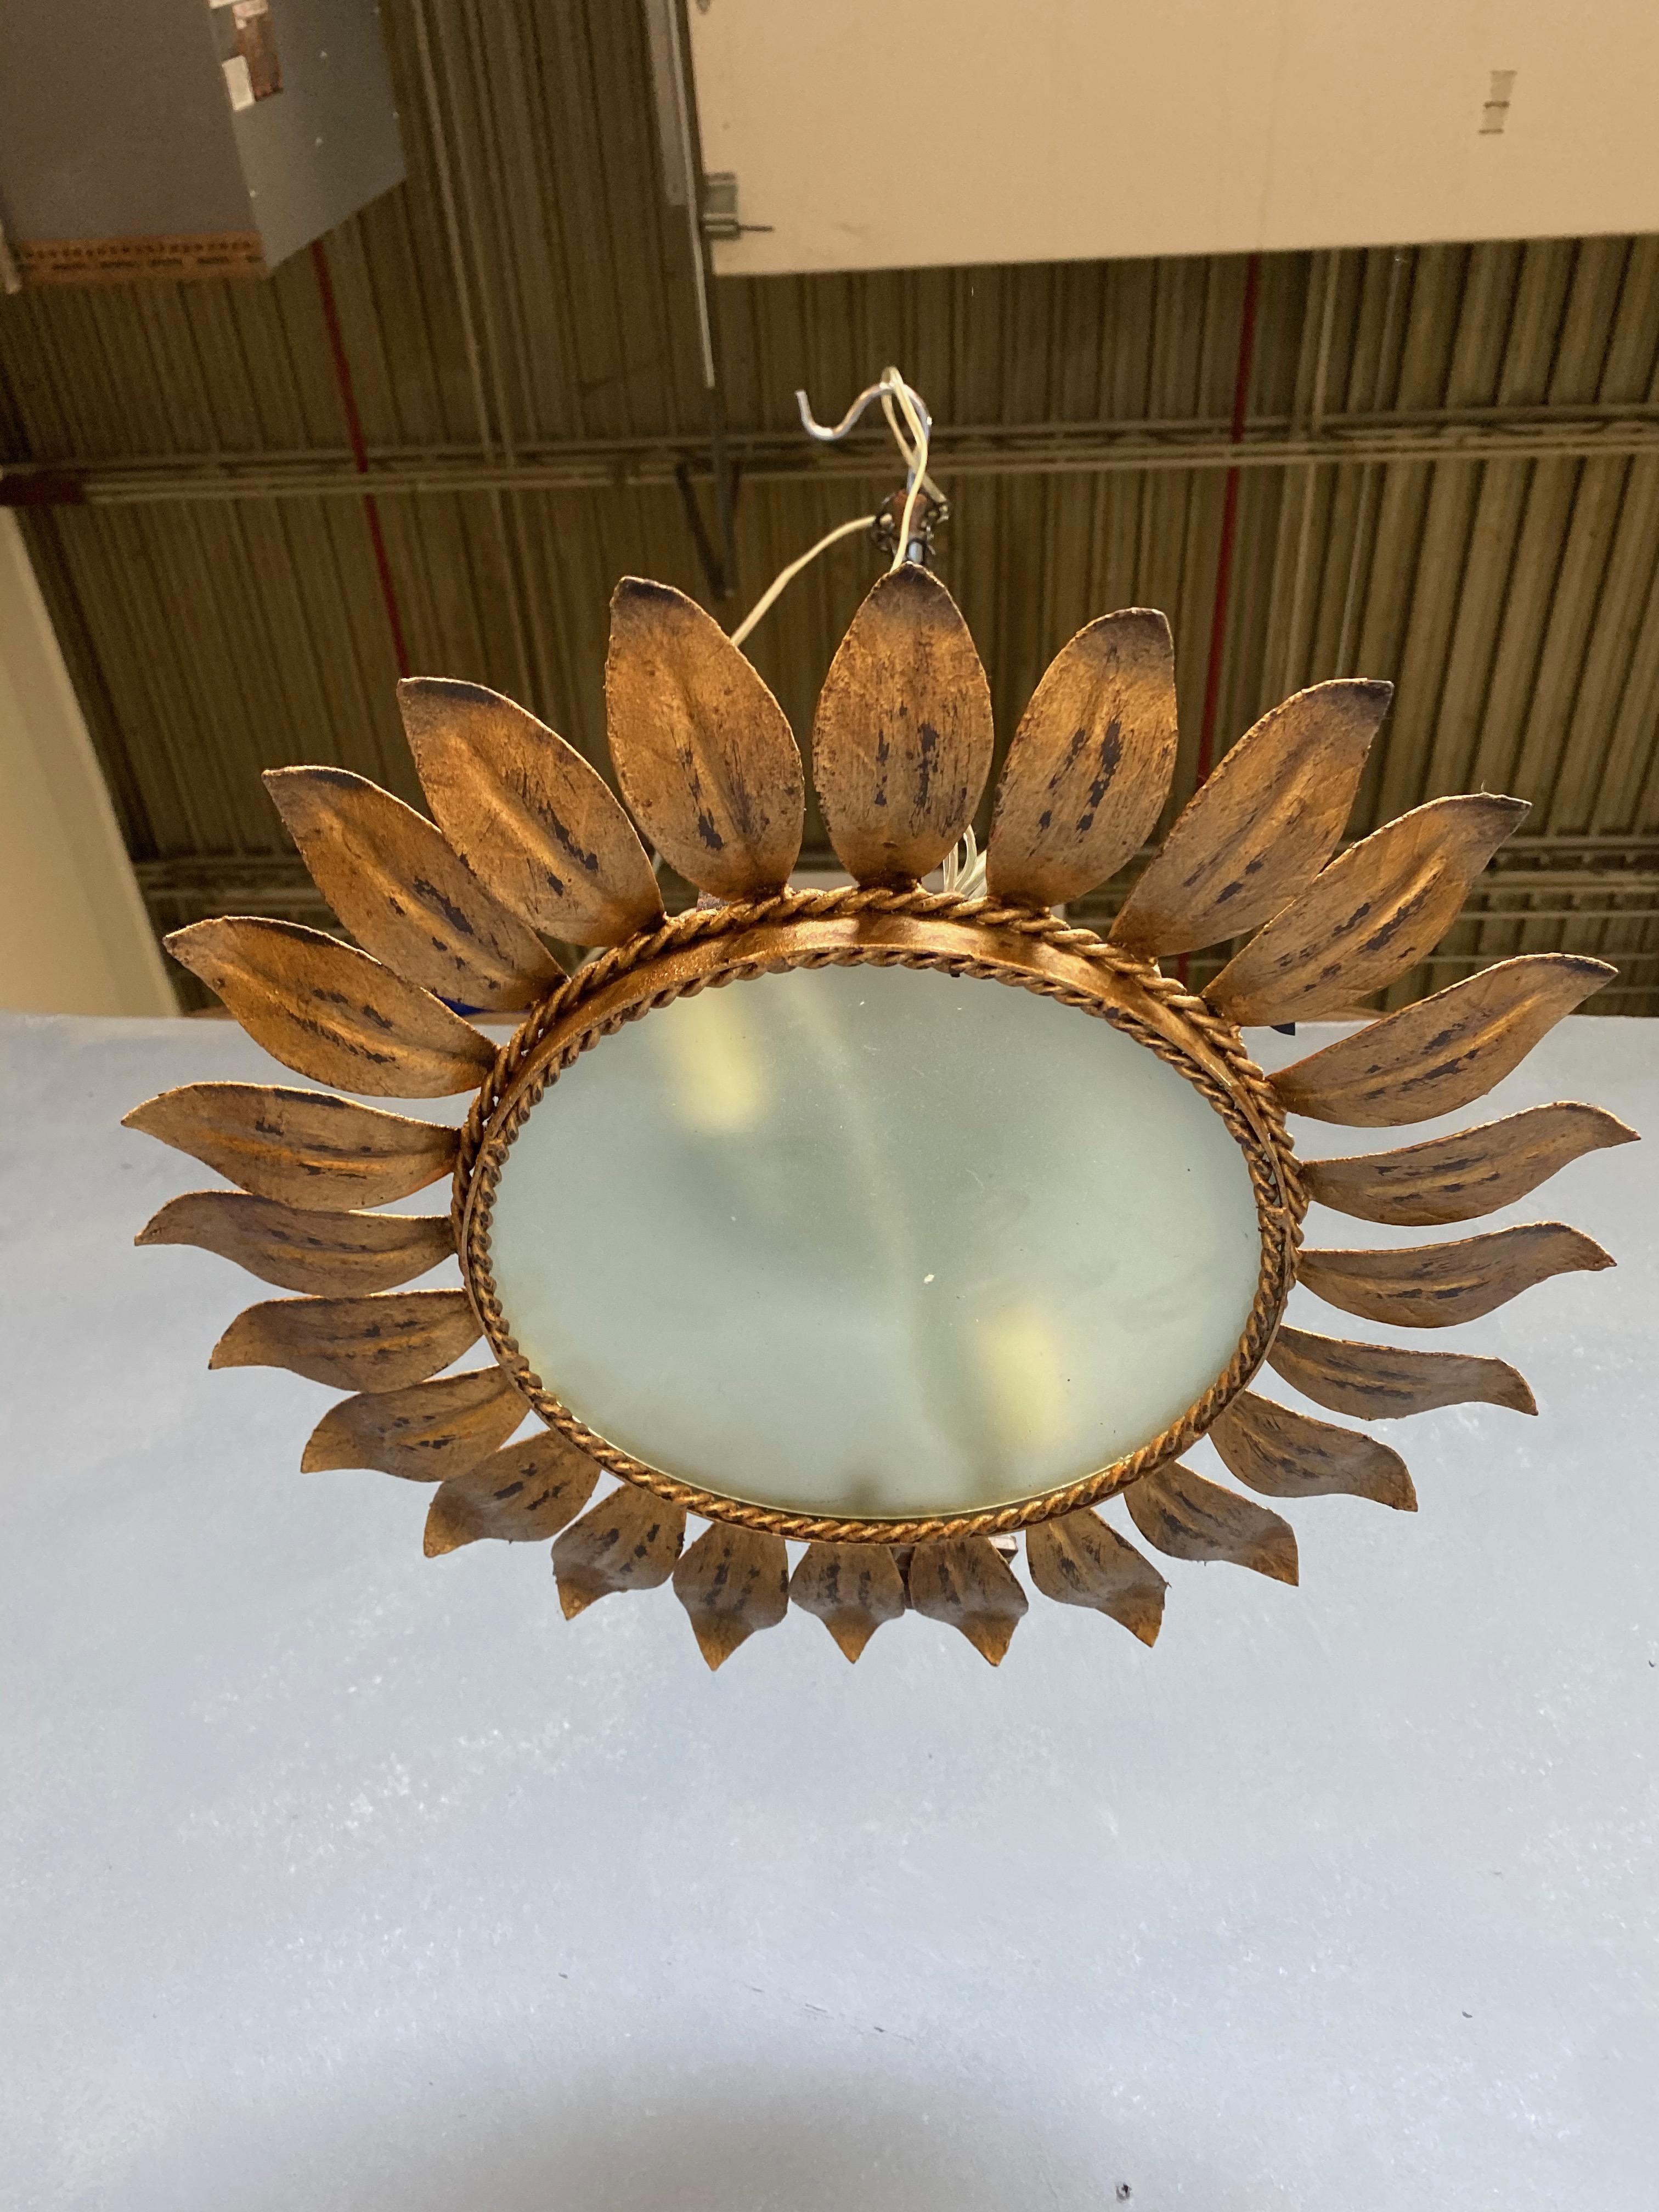 A small flush mount ceiling fixture with closely joined leaf motifs radiating from a raised center circle and framed by 4 strands of twisted braiding. The hand applied finish has a rich gold patina over a darker under coat. This fixture has been